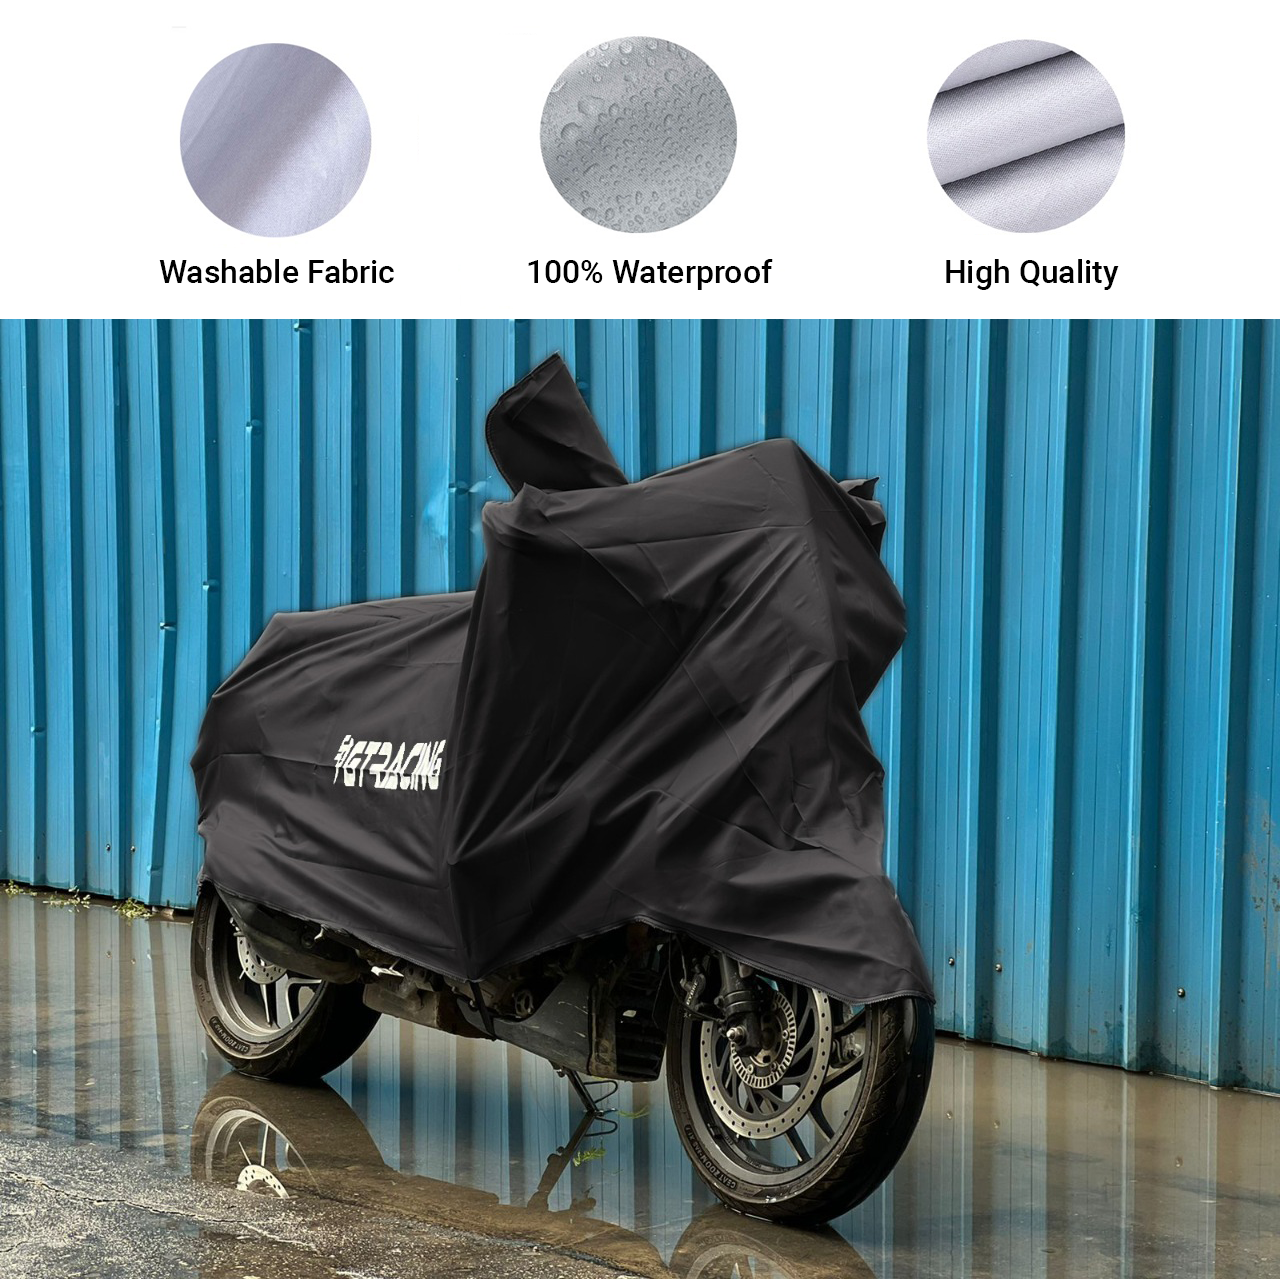 Steelbird 100% Waterproof Bike Cover GT Racing UV Protection Water-Resistant & Dustproof (Black PVC), Bike Body Cover With Carry Bag (All Bikes Upto Pulsar 180cc Size)